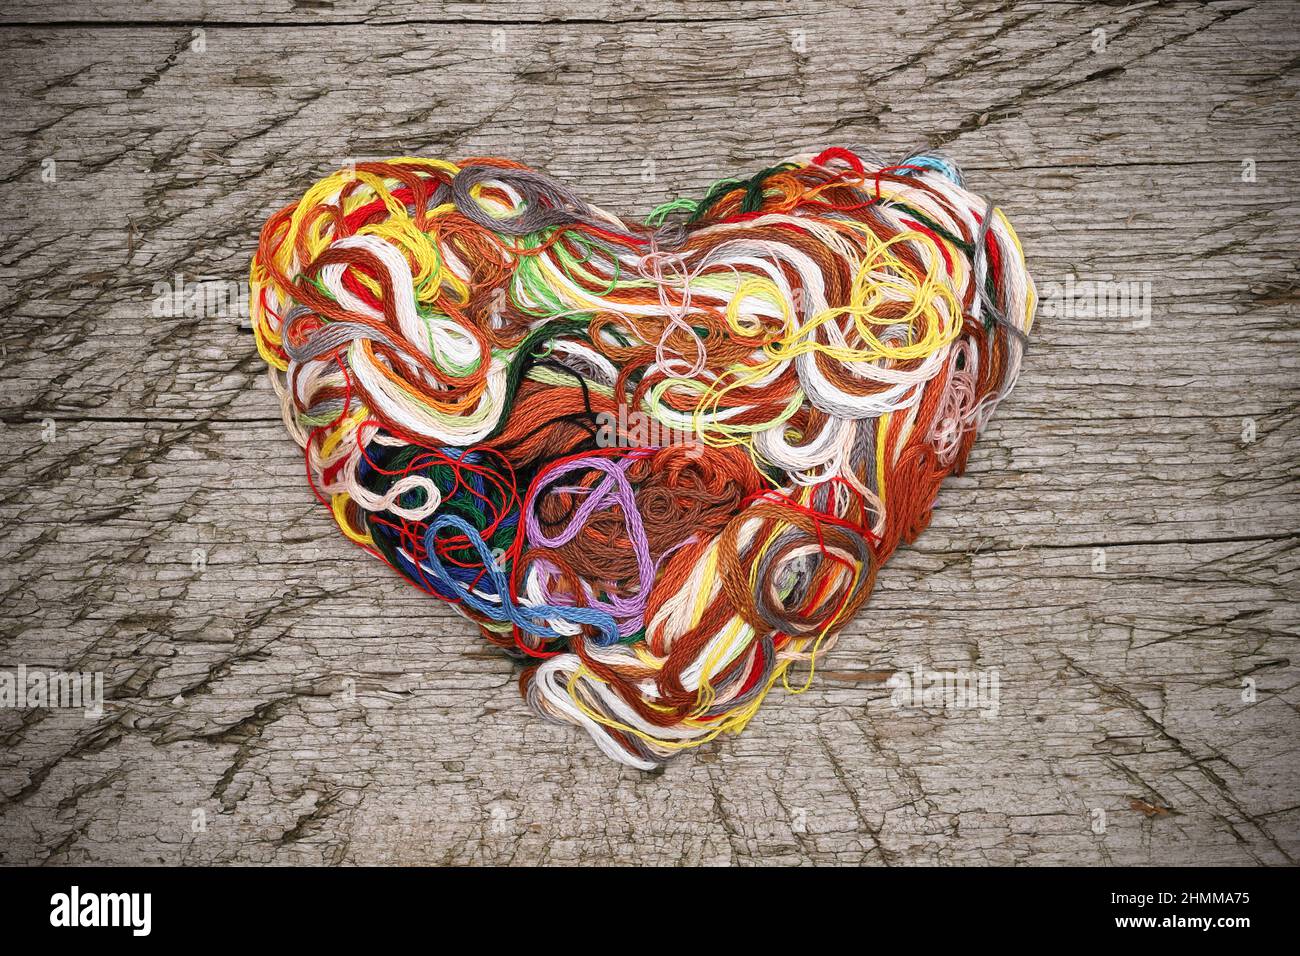 Heart shaped entangled thread on grungy wooden background Stock Photo